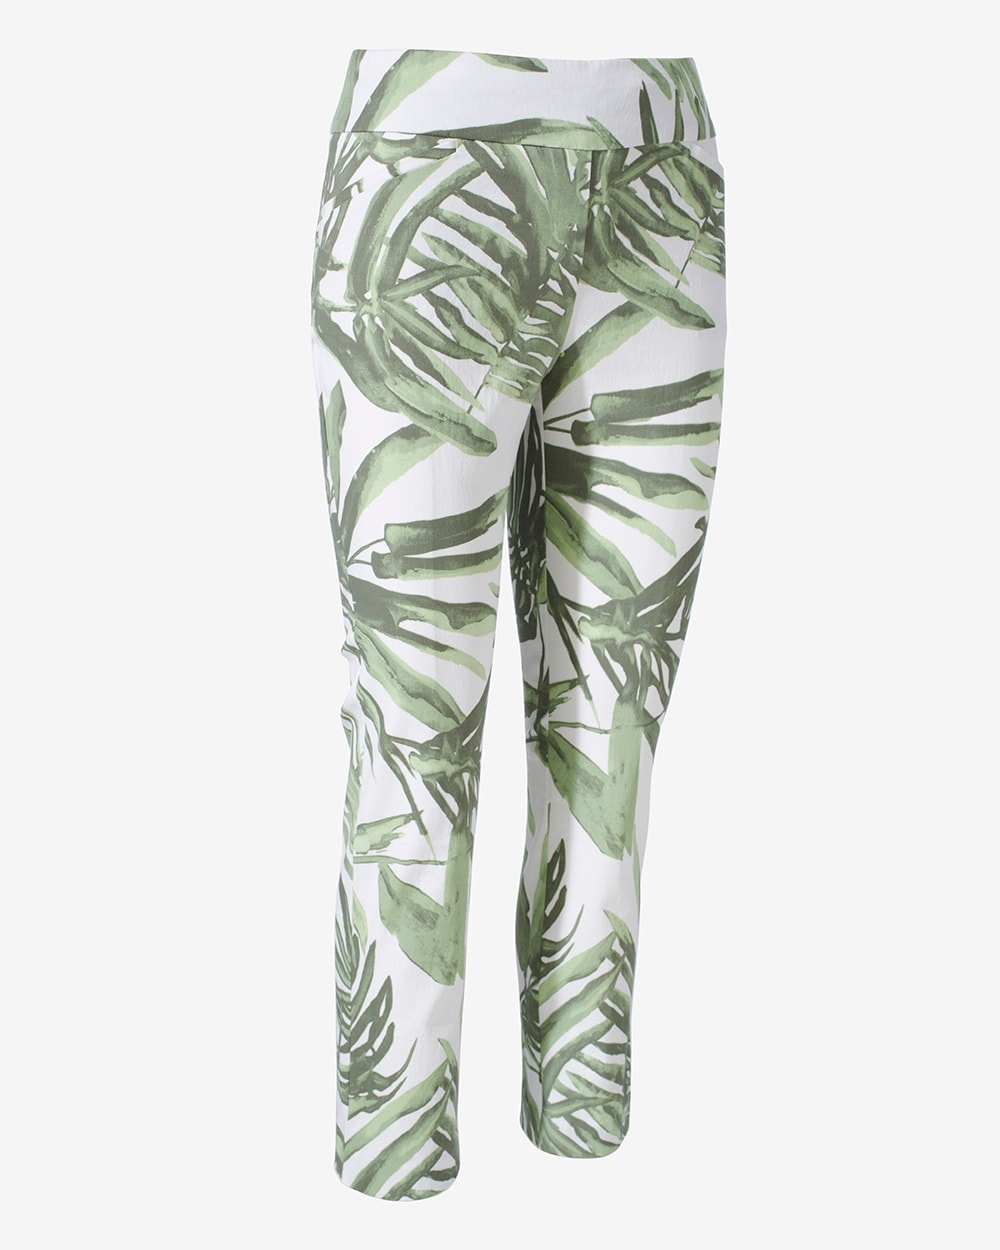 Perfect Stretch Fabulously Slimming Jungle Ankle Pants